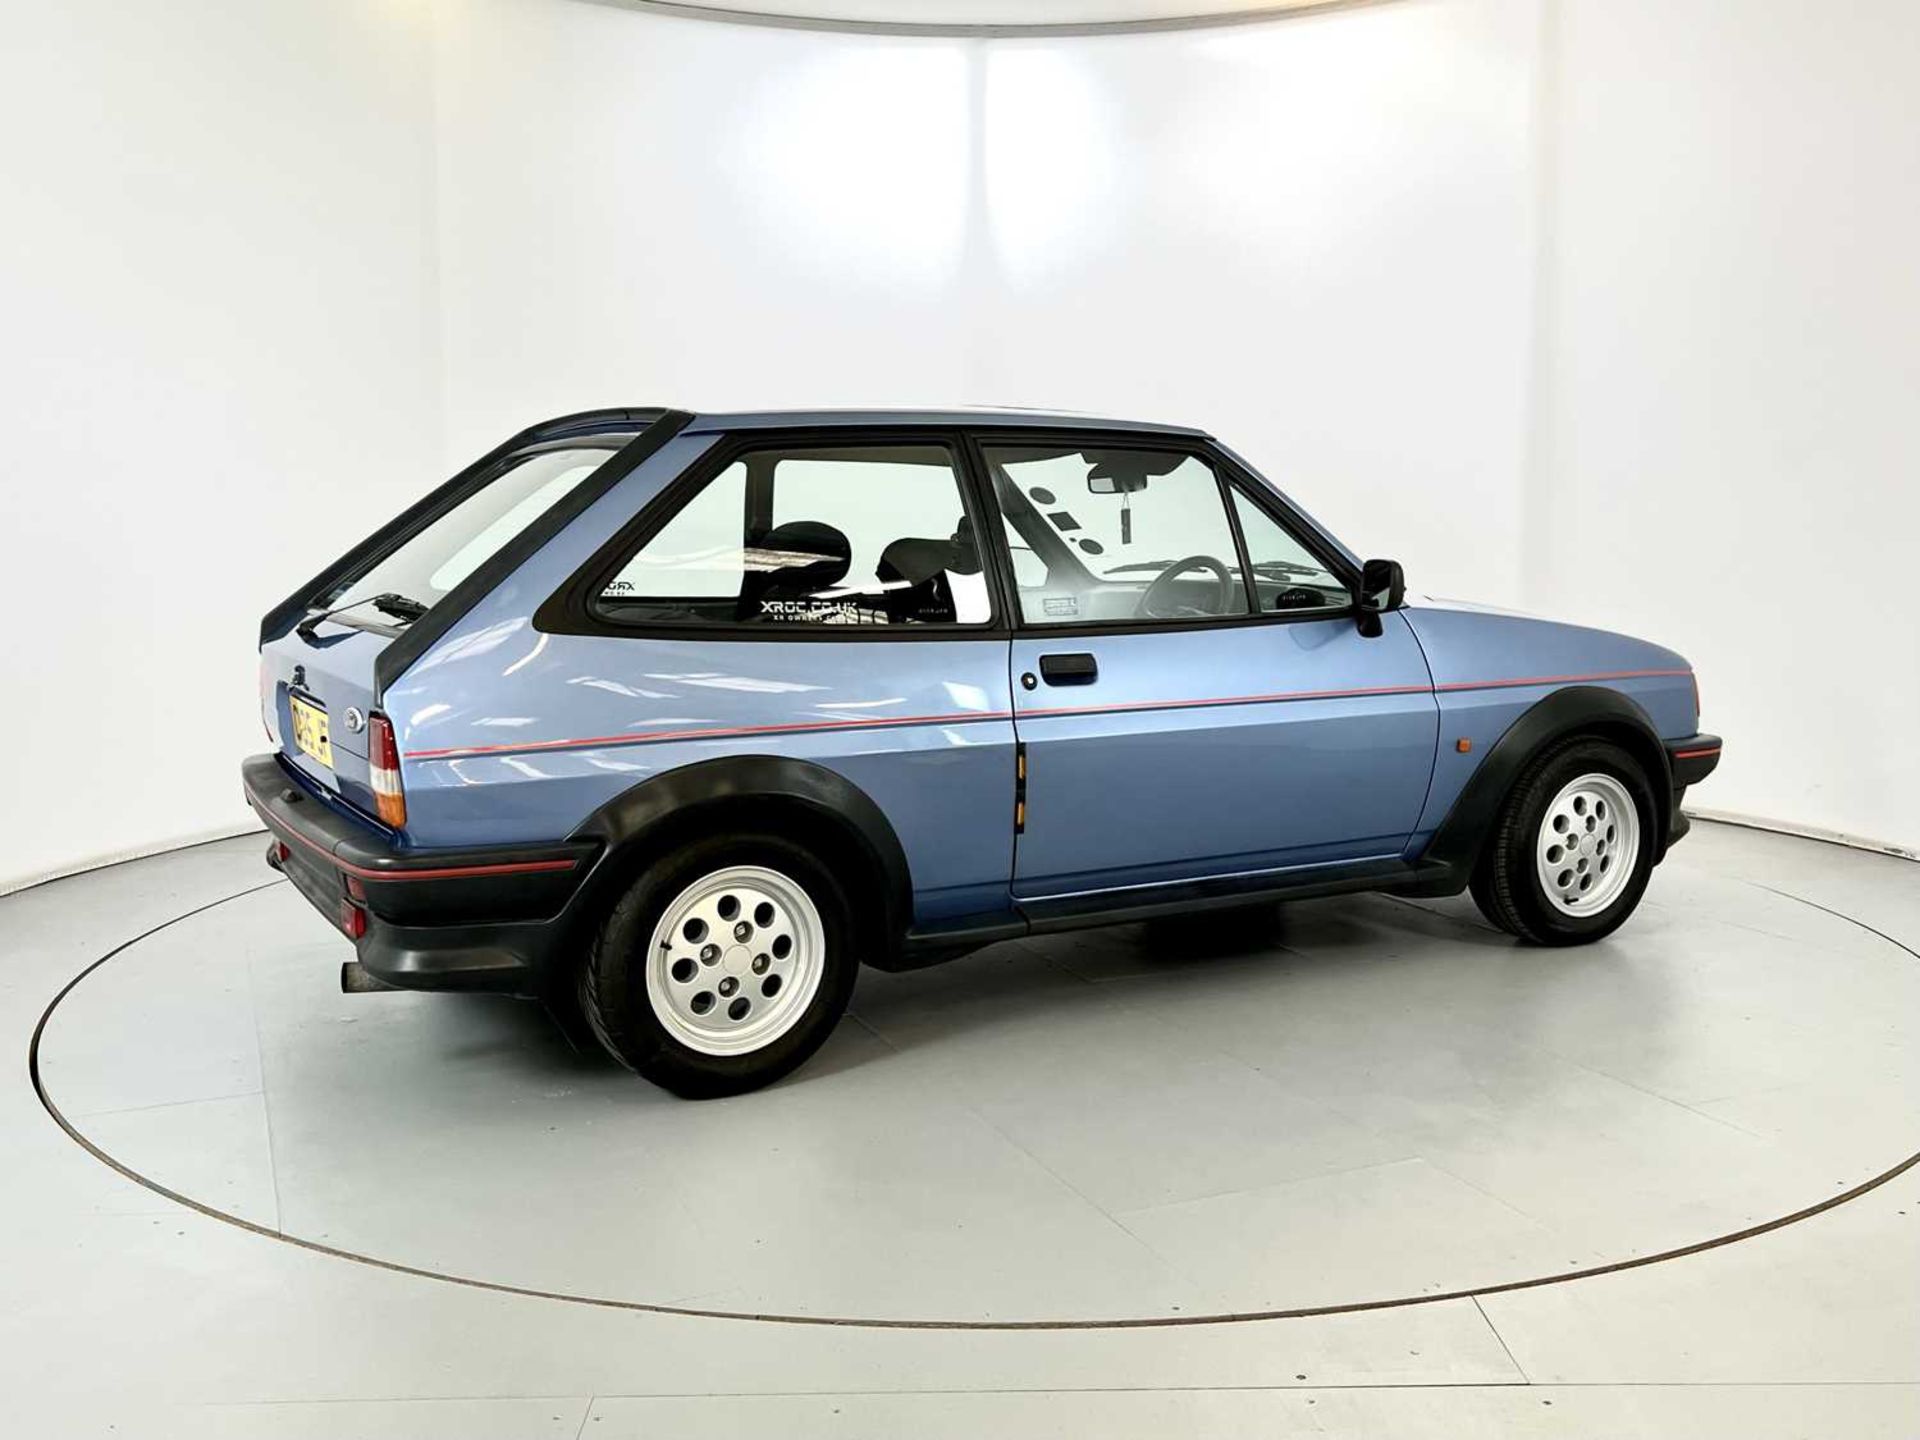 1986 Ford Fiesta XR2 - Image 10 of 33